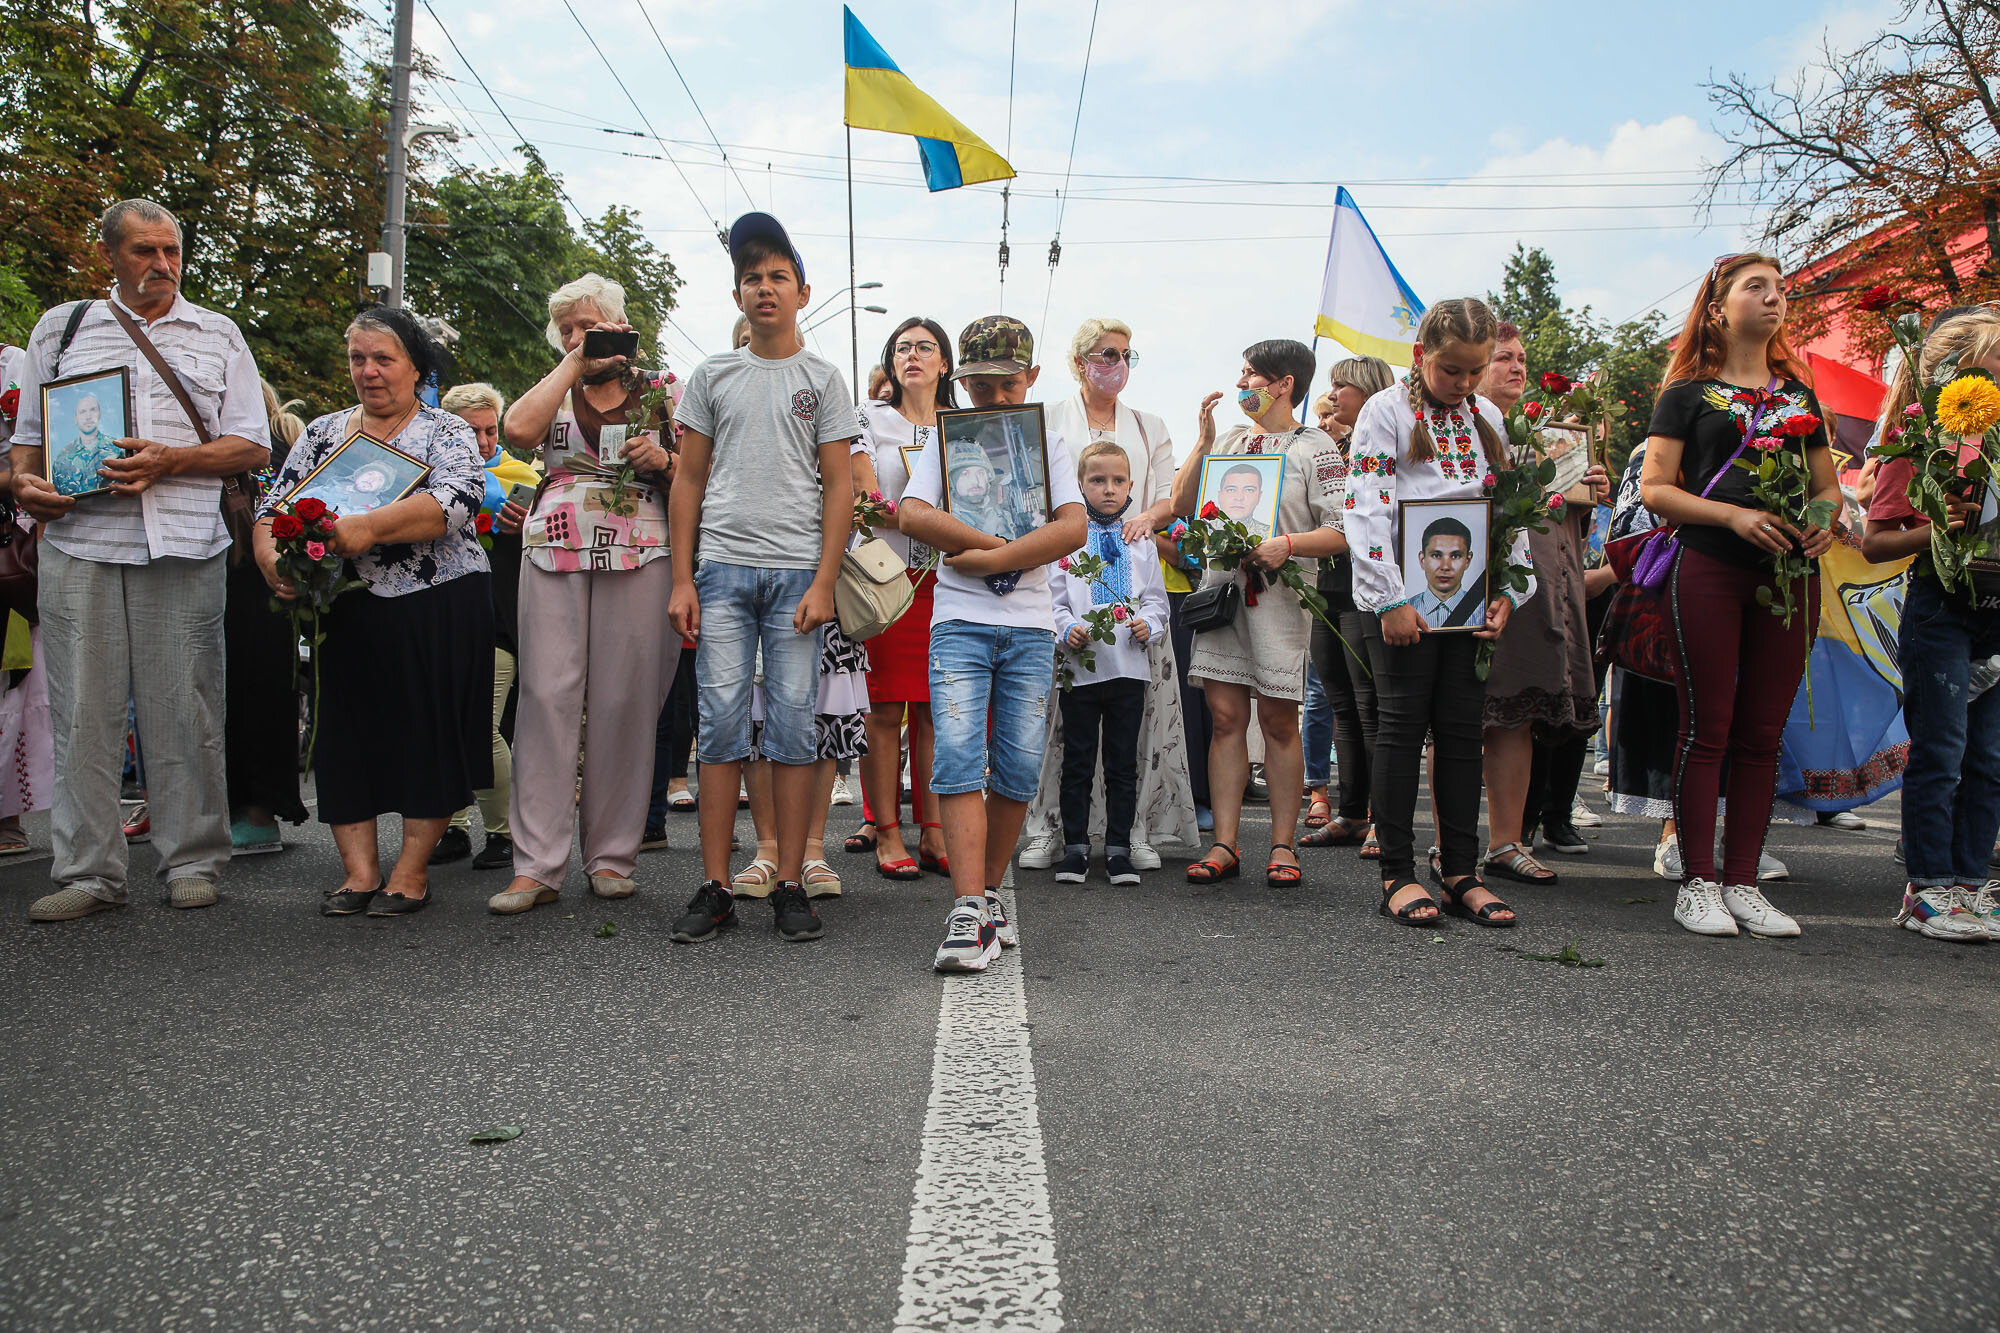 Relatives carry portraits of fallen soldiers during the March of Defenders of Ukraine as part of Ukraine&#8217;s Independence Day celebrations in Kyiv on Aug. 24, 2020.